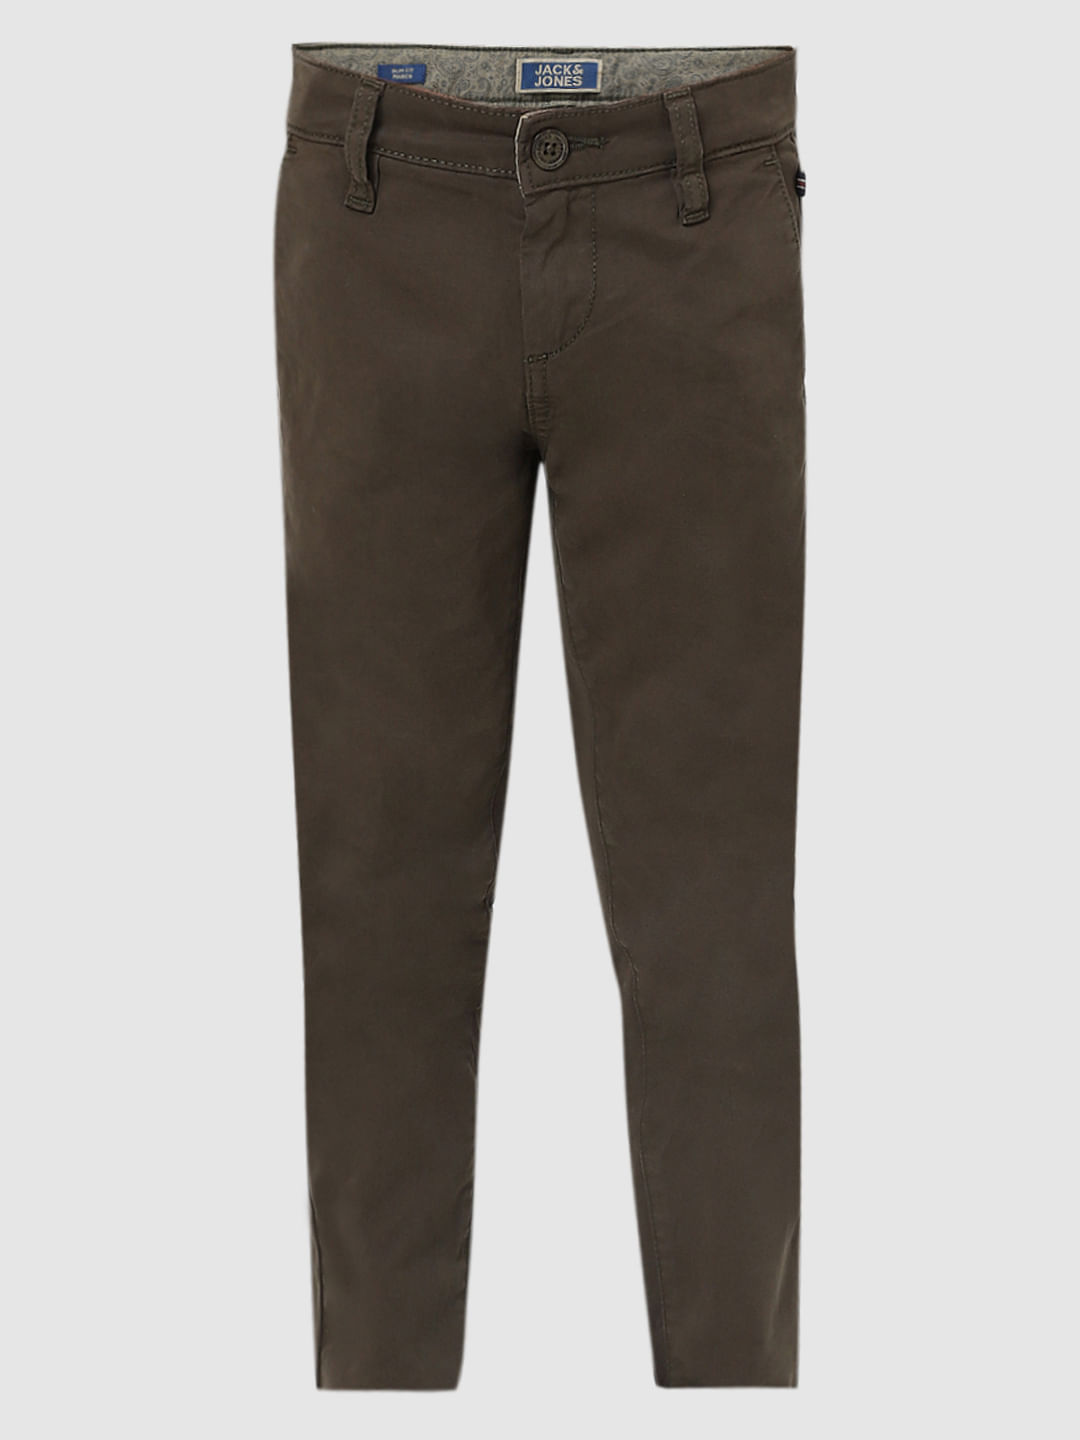 Pants for Men | Shop Stylish Men's Pants Now at Best Prices at Pepe Jeans  India!